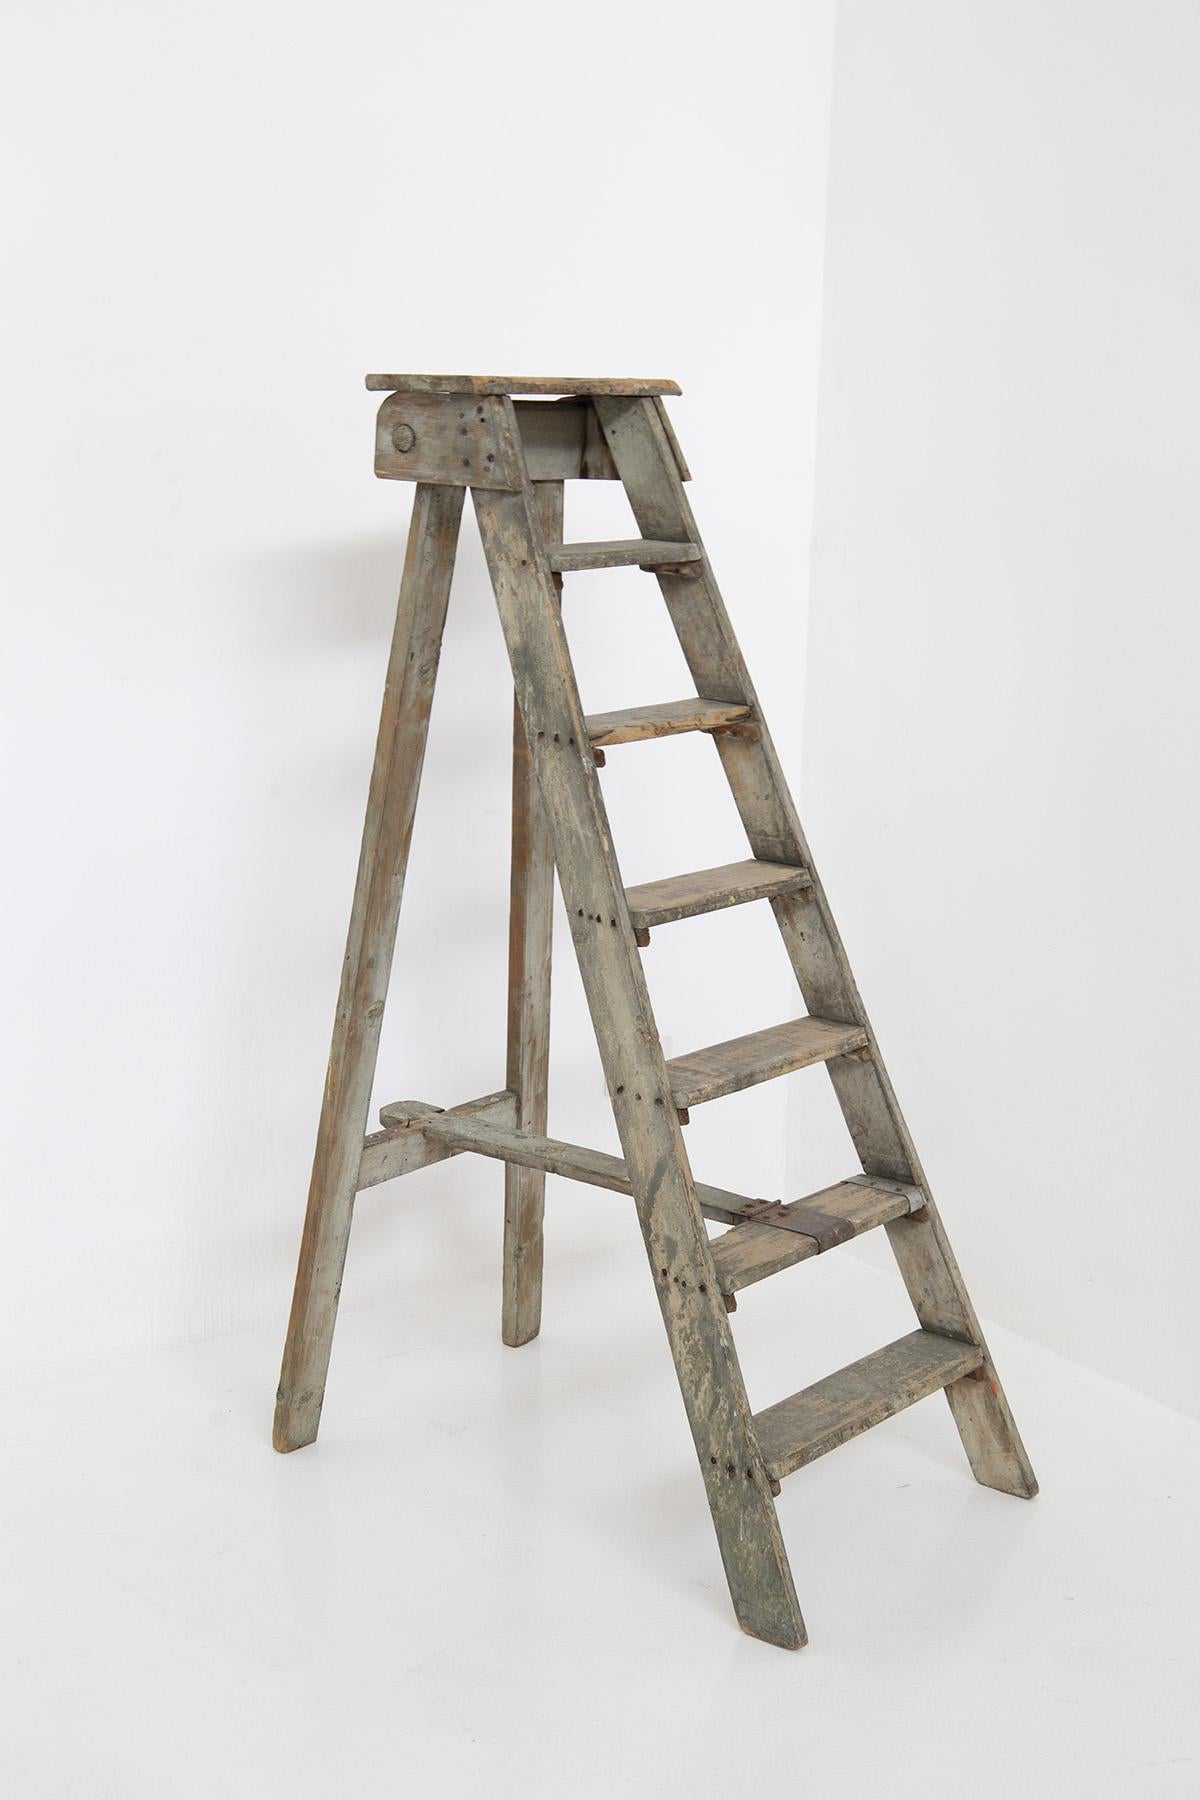 Fabulous Italian Vintage rustic staircase from the 1920s.
The staircase is made of wood.
The ladder is a beautiful painted wooden decorative element from the Rustic Chic period of the early 1920s, made in Italy. It can also be placed as in the